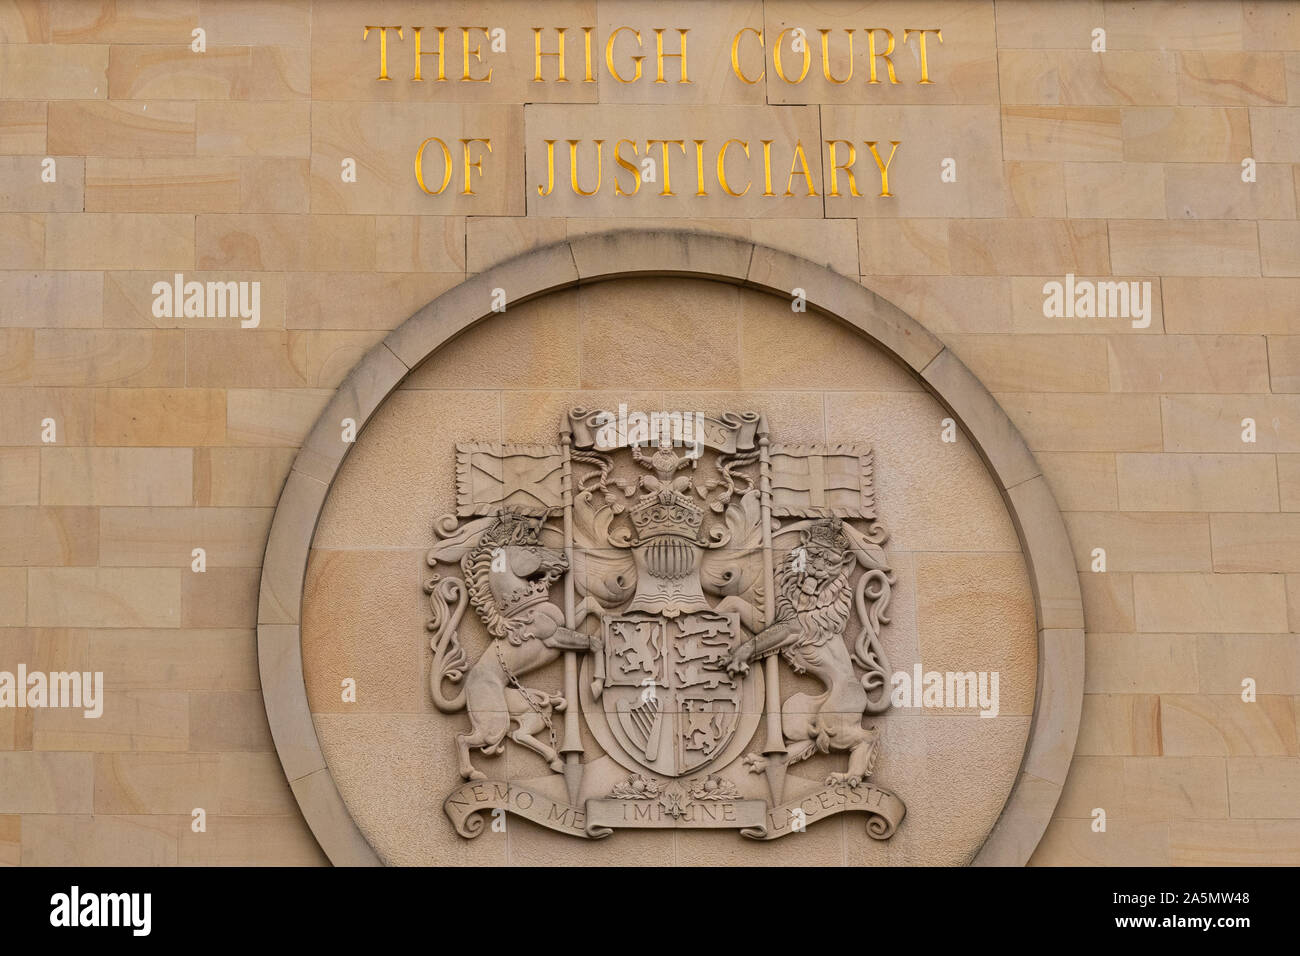 The High Court of Justiciary, Glasgow, Scotland, UK Stock Photo